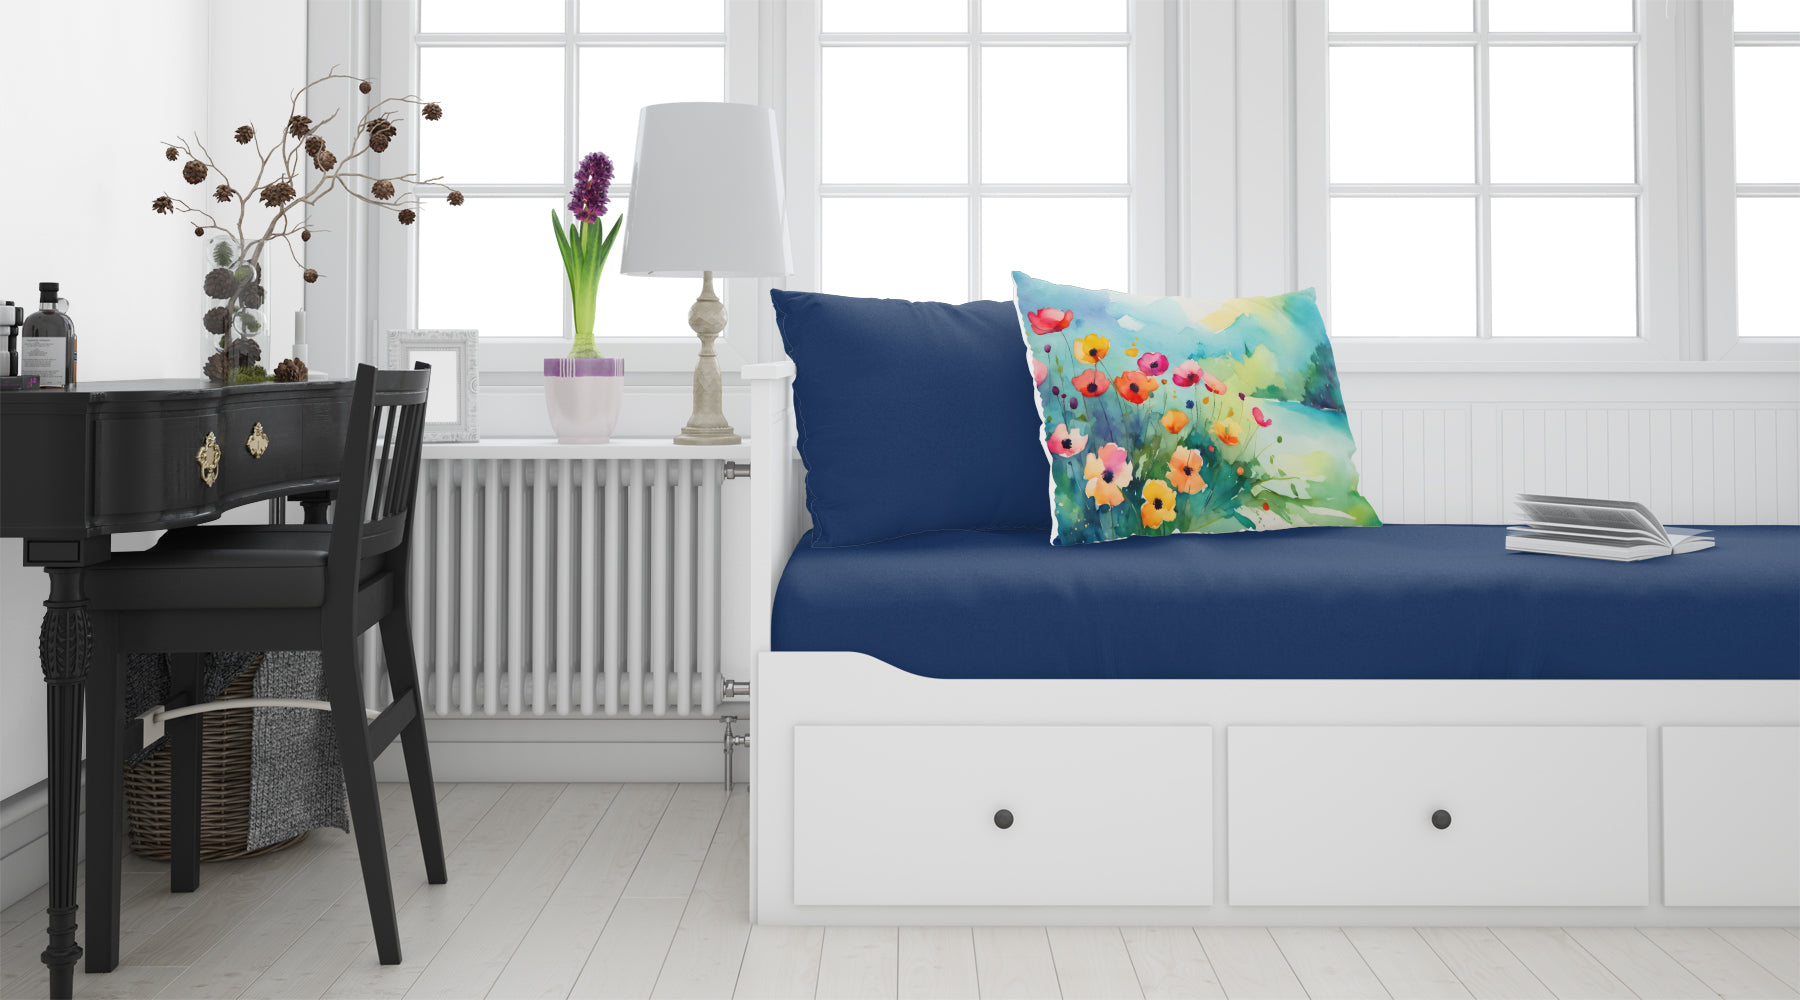 Buy this Anemones in Watercolor Fabric Standard Pillowcase